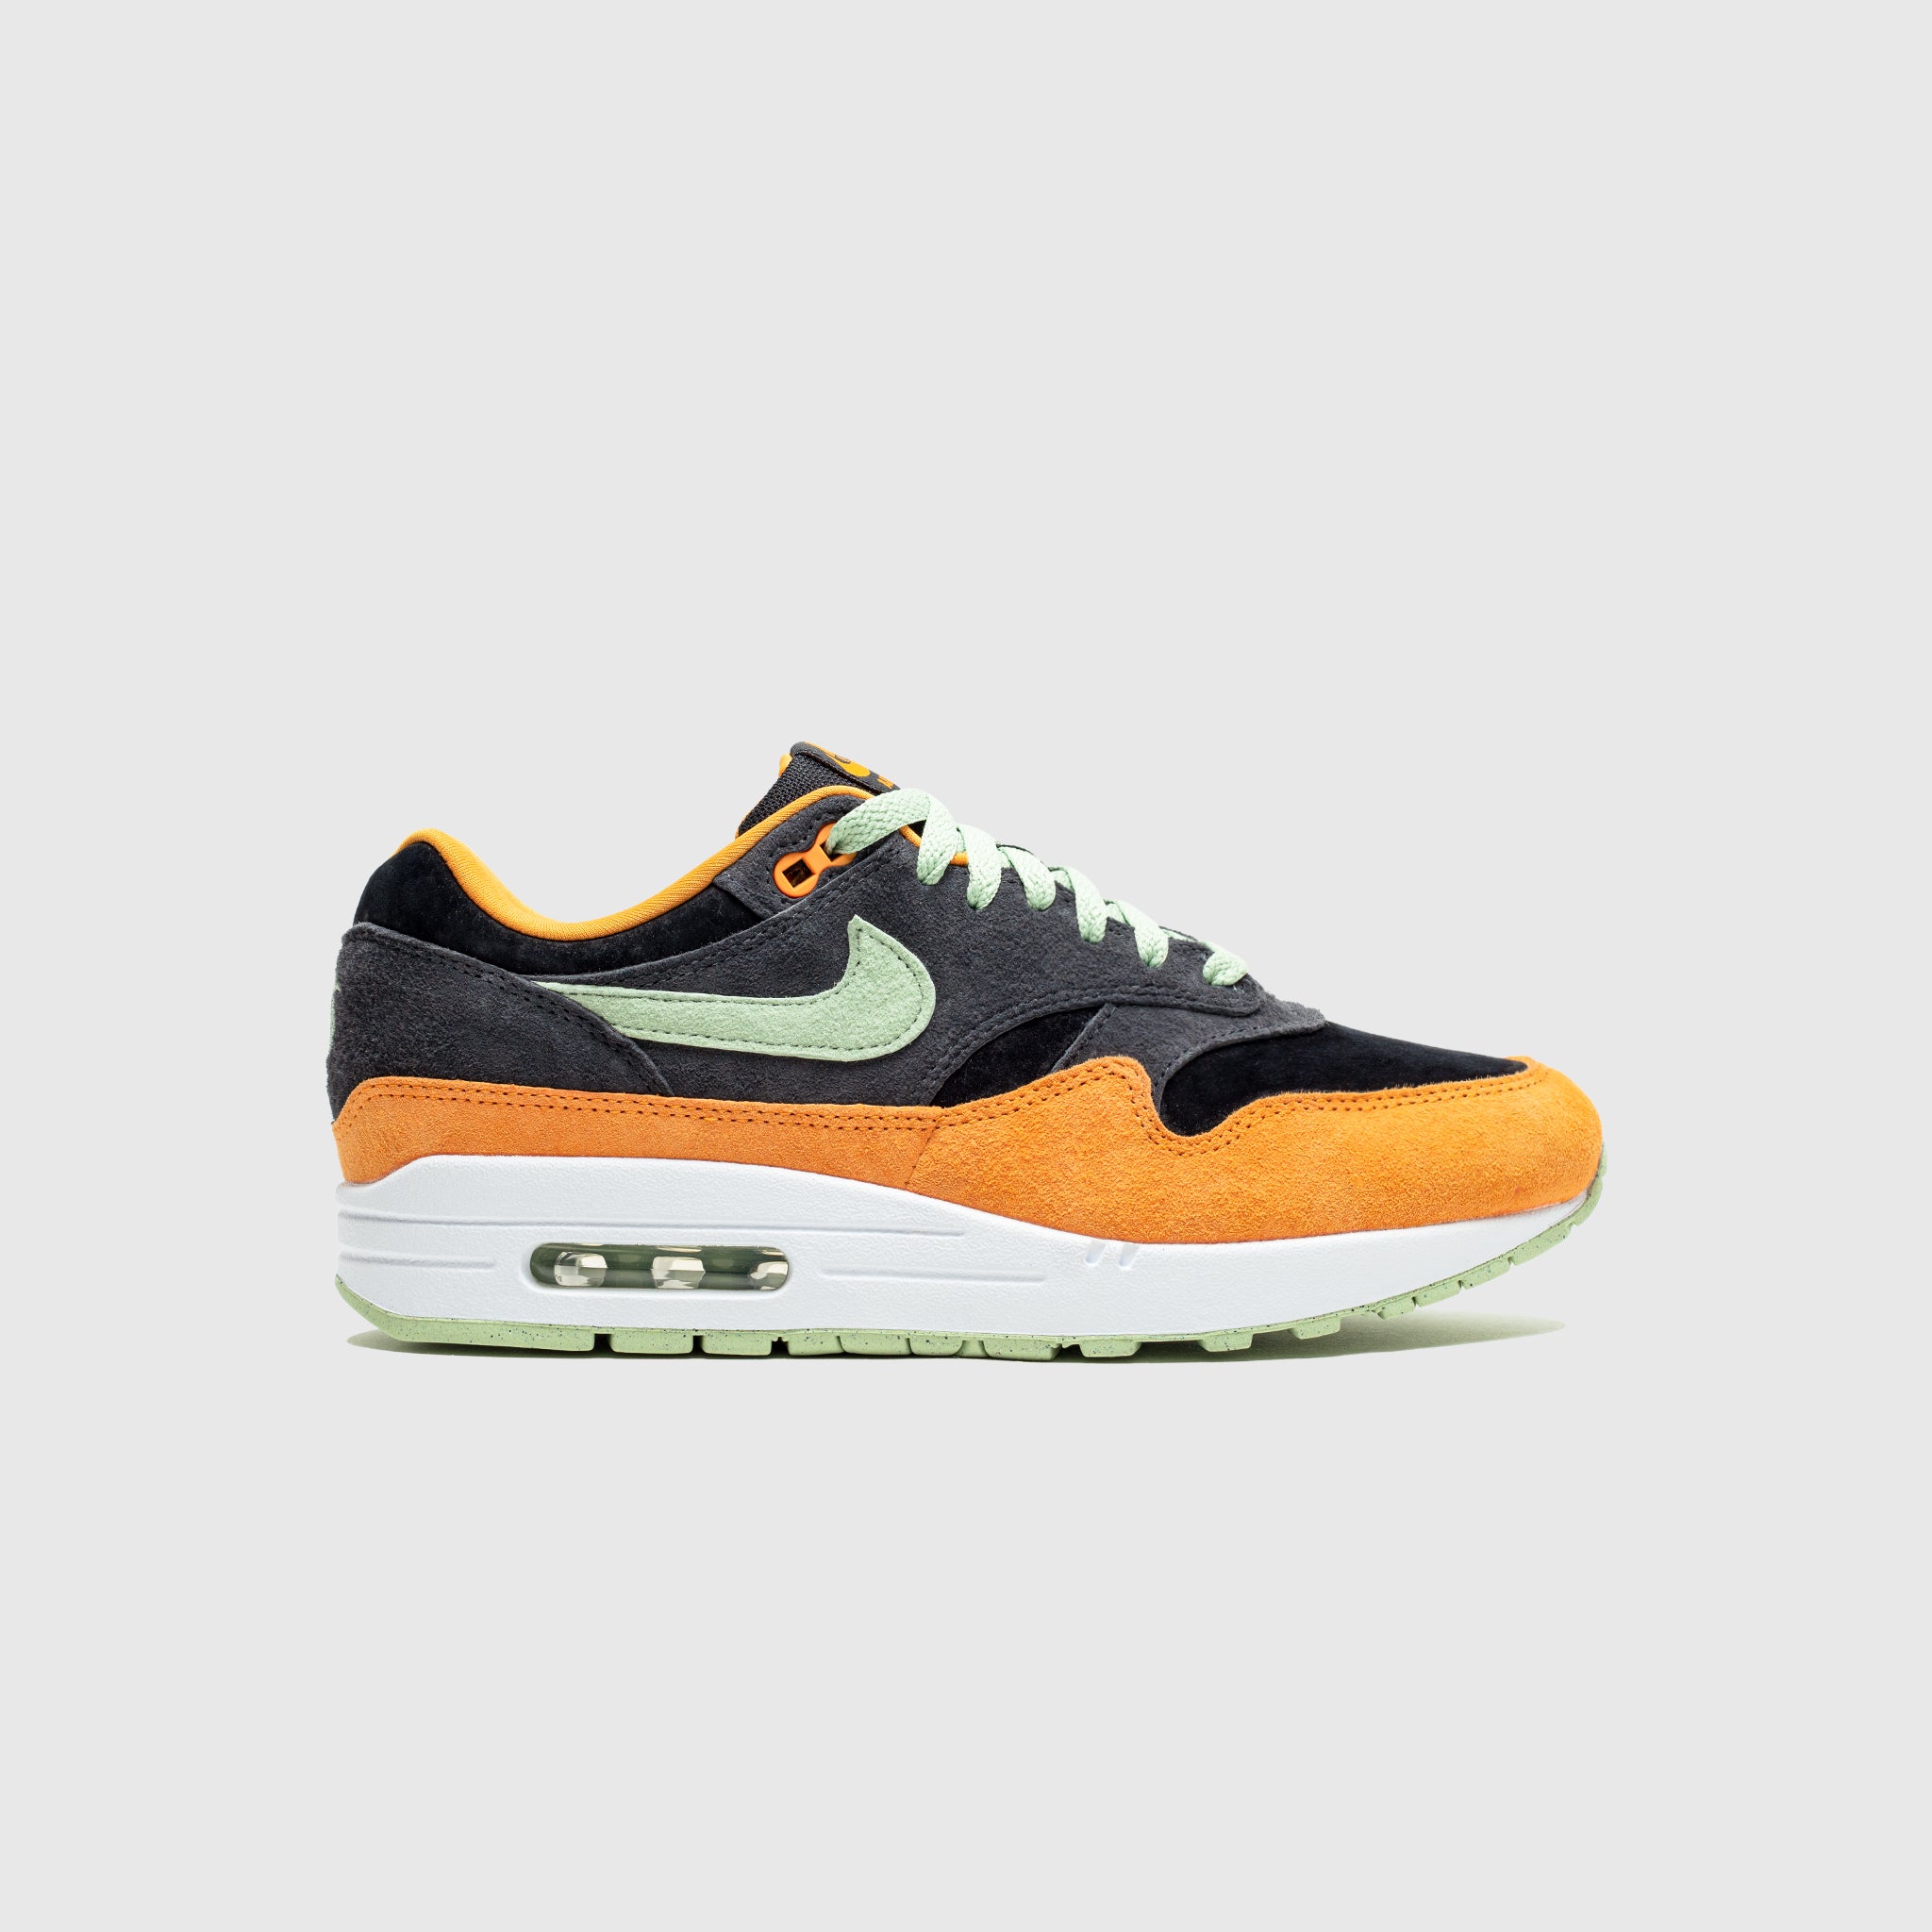 Meter Hub evalueren AIR MAX 1 PRM "UGLY DUCKLING ANTHRACITE" – PACKER SHOES